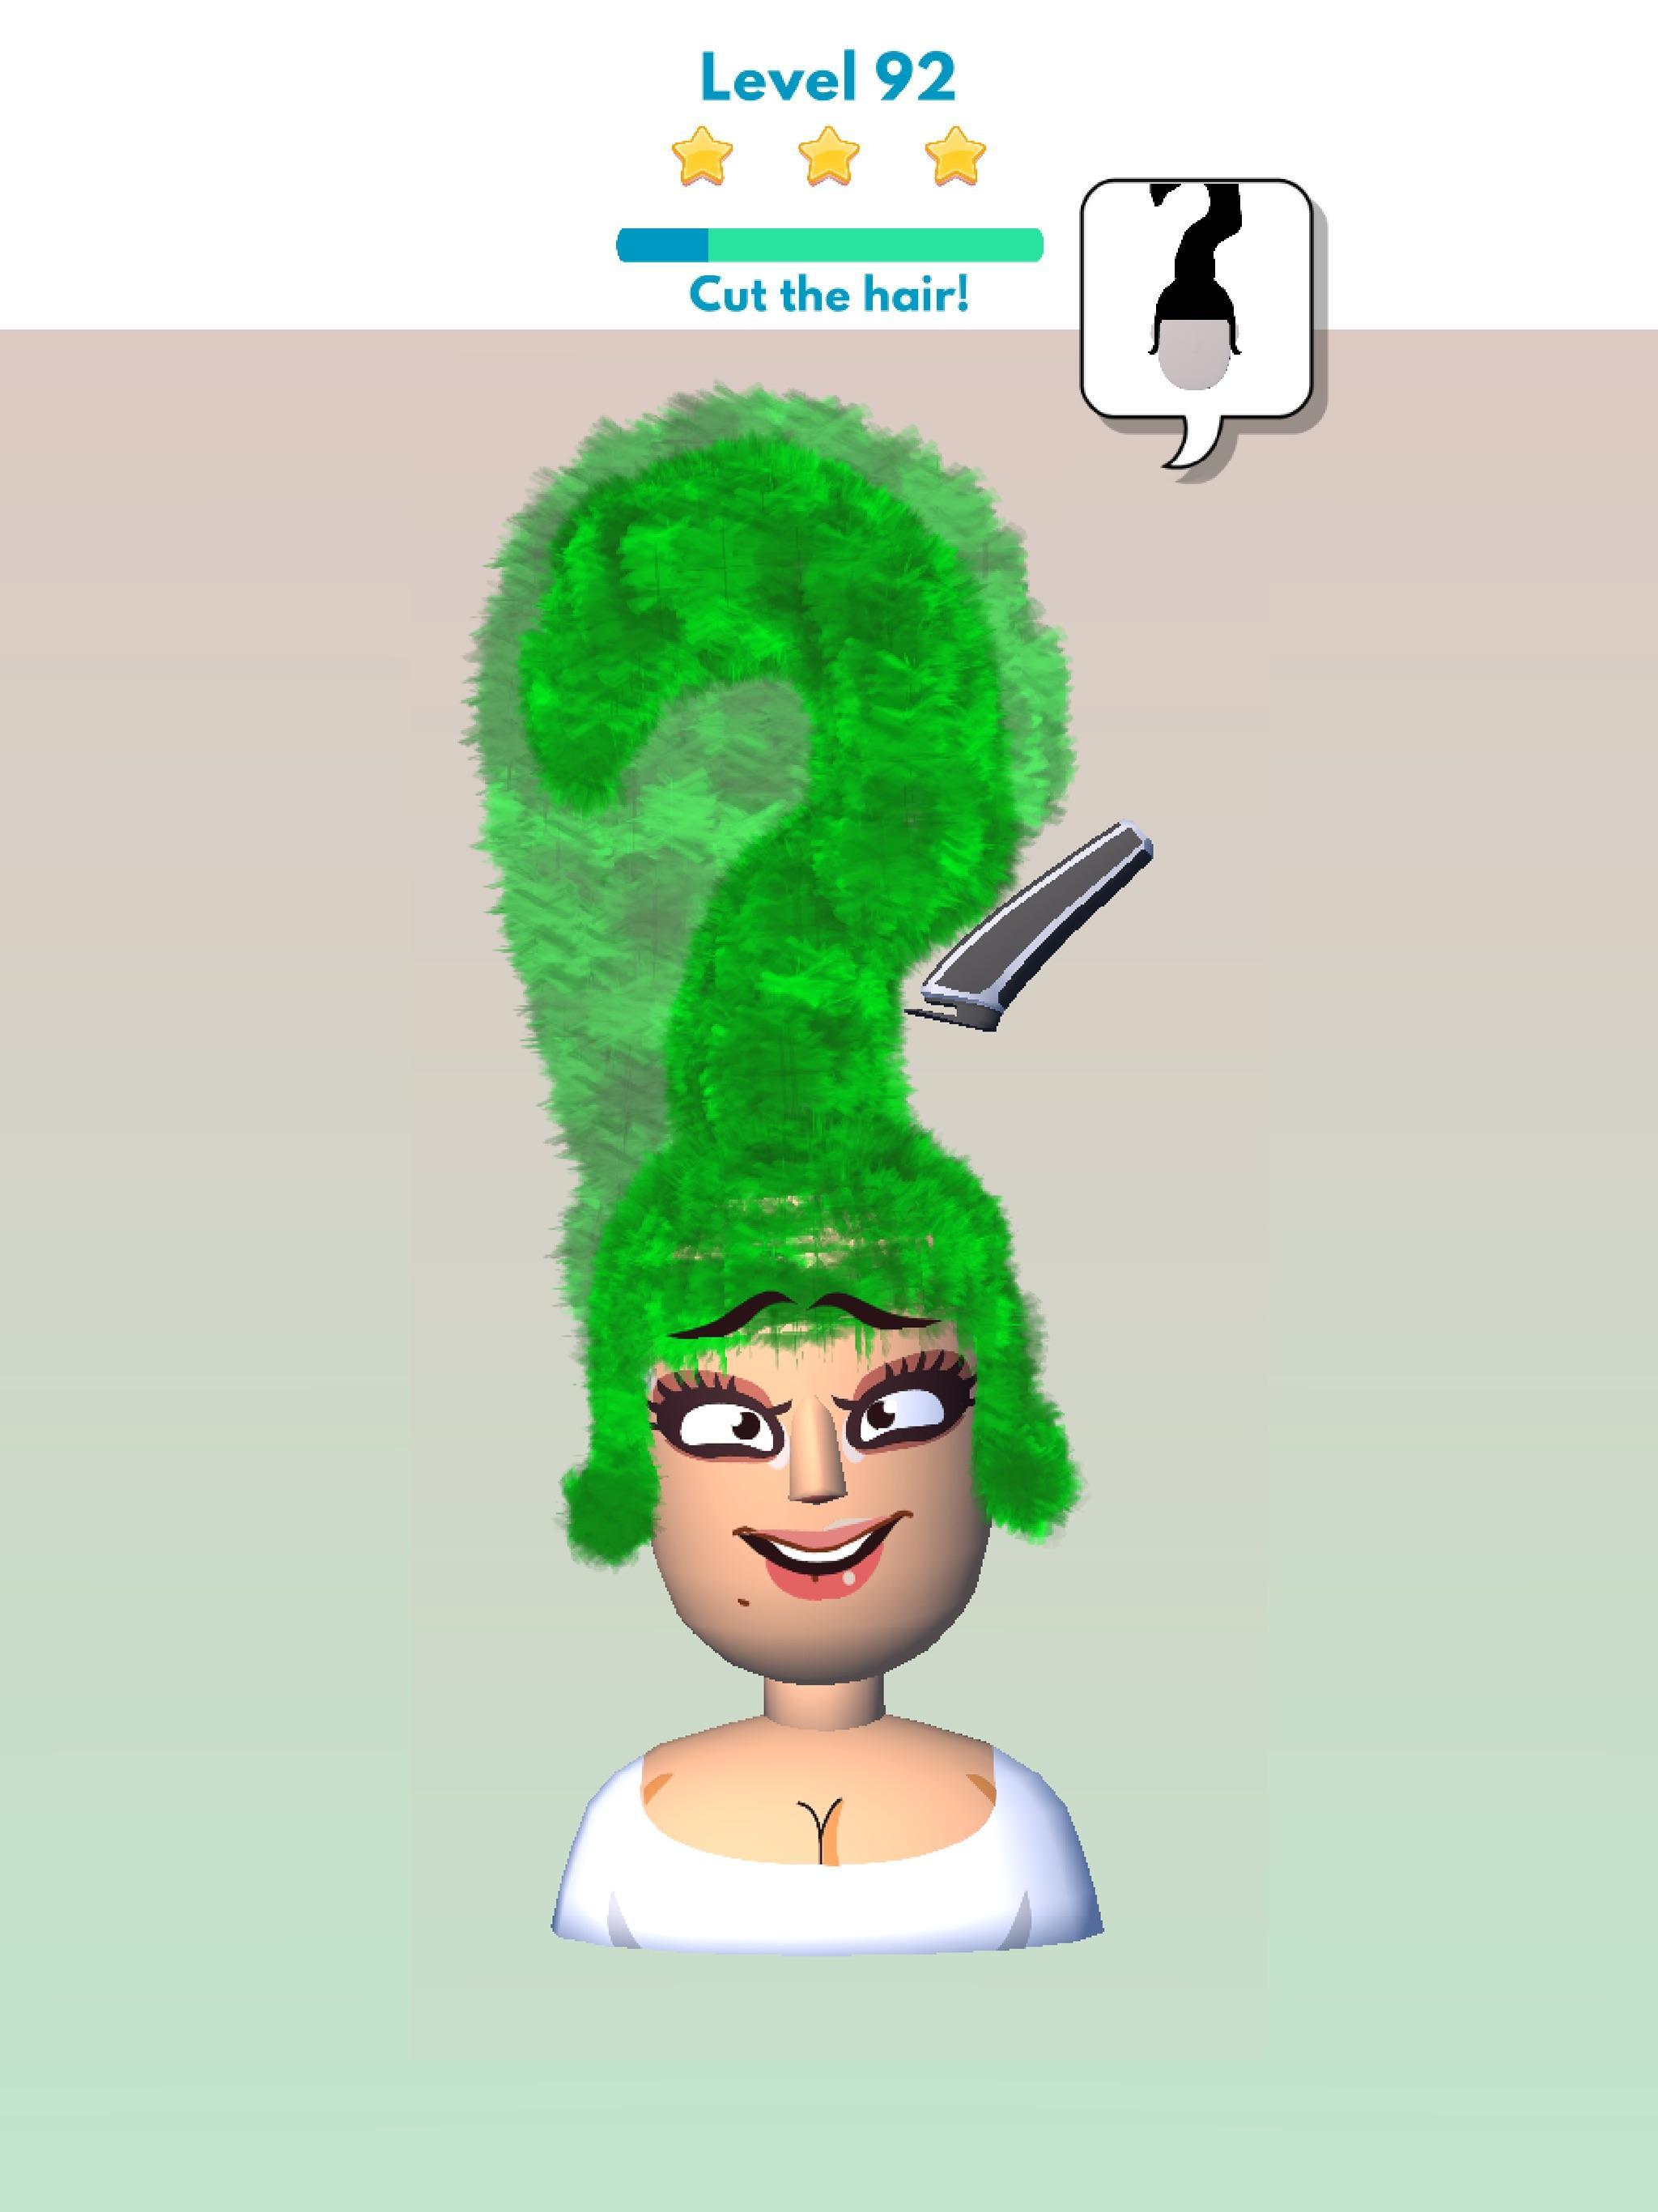 Barber Shop - Hair Cut game for Android - APK Download